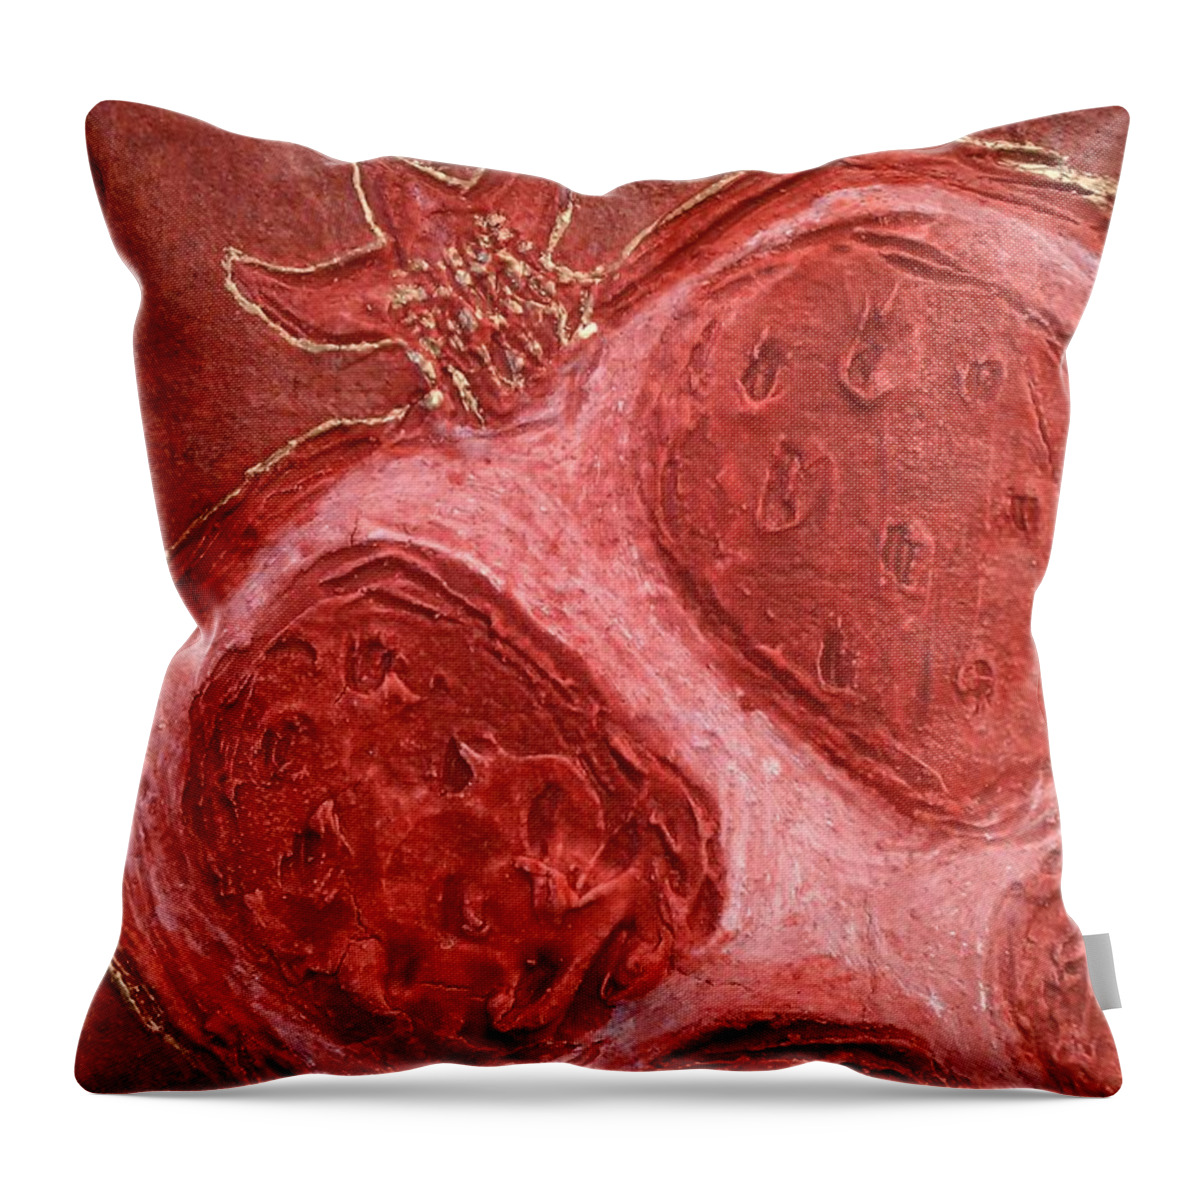 https://render.fineartamerica.com/images/rendered/default/throw-pillow/images-medium/red-gold-juicy-thick-textured-cut-pomegranate-with-seeds-m-zimmerman.jpg?&targetx=0&targety=-99&imagewidth=479&imageheight=678&modelwidth=479&modelheight=479&backgroundcolor=AD372D&orientation=0&producttype=throwpillow-14-14